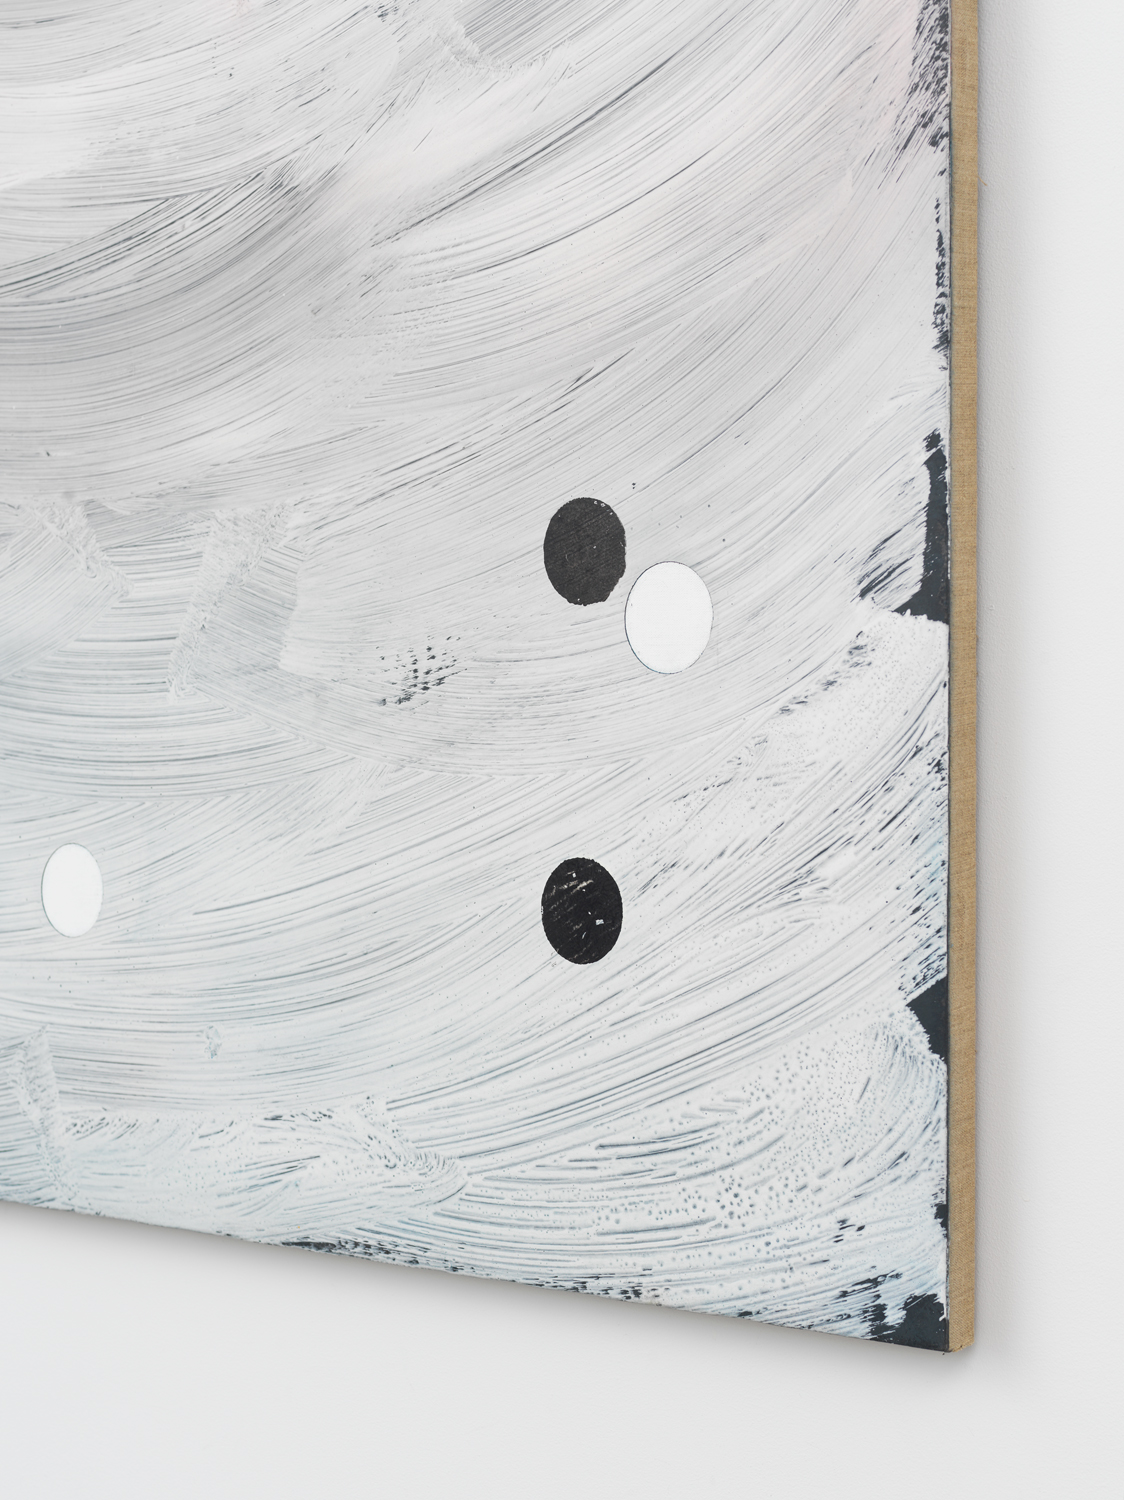 Alex Kwartler, Untitled detail, 2019, plaster, acrylic, and oil on linen, 72h x 48w in.